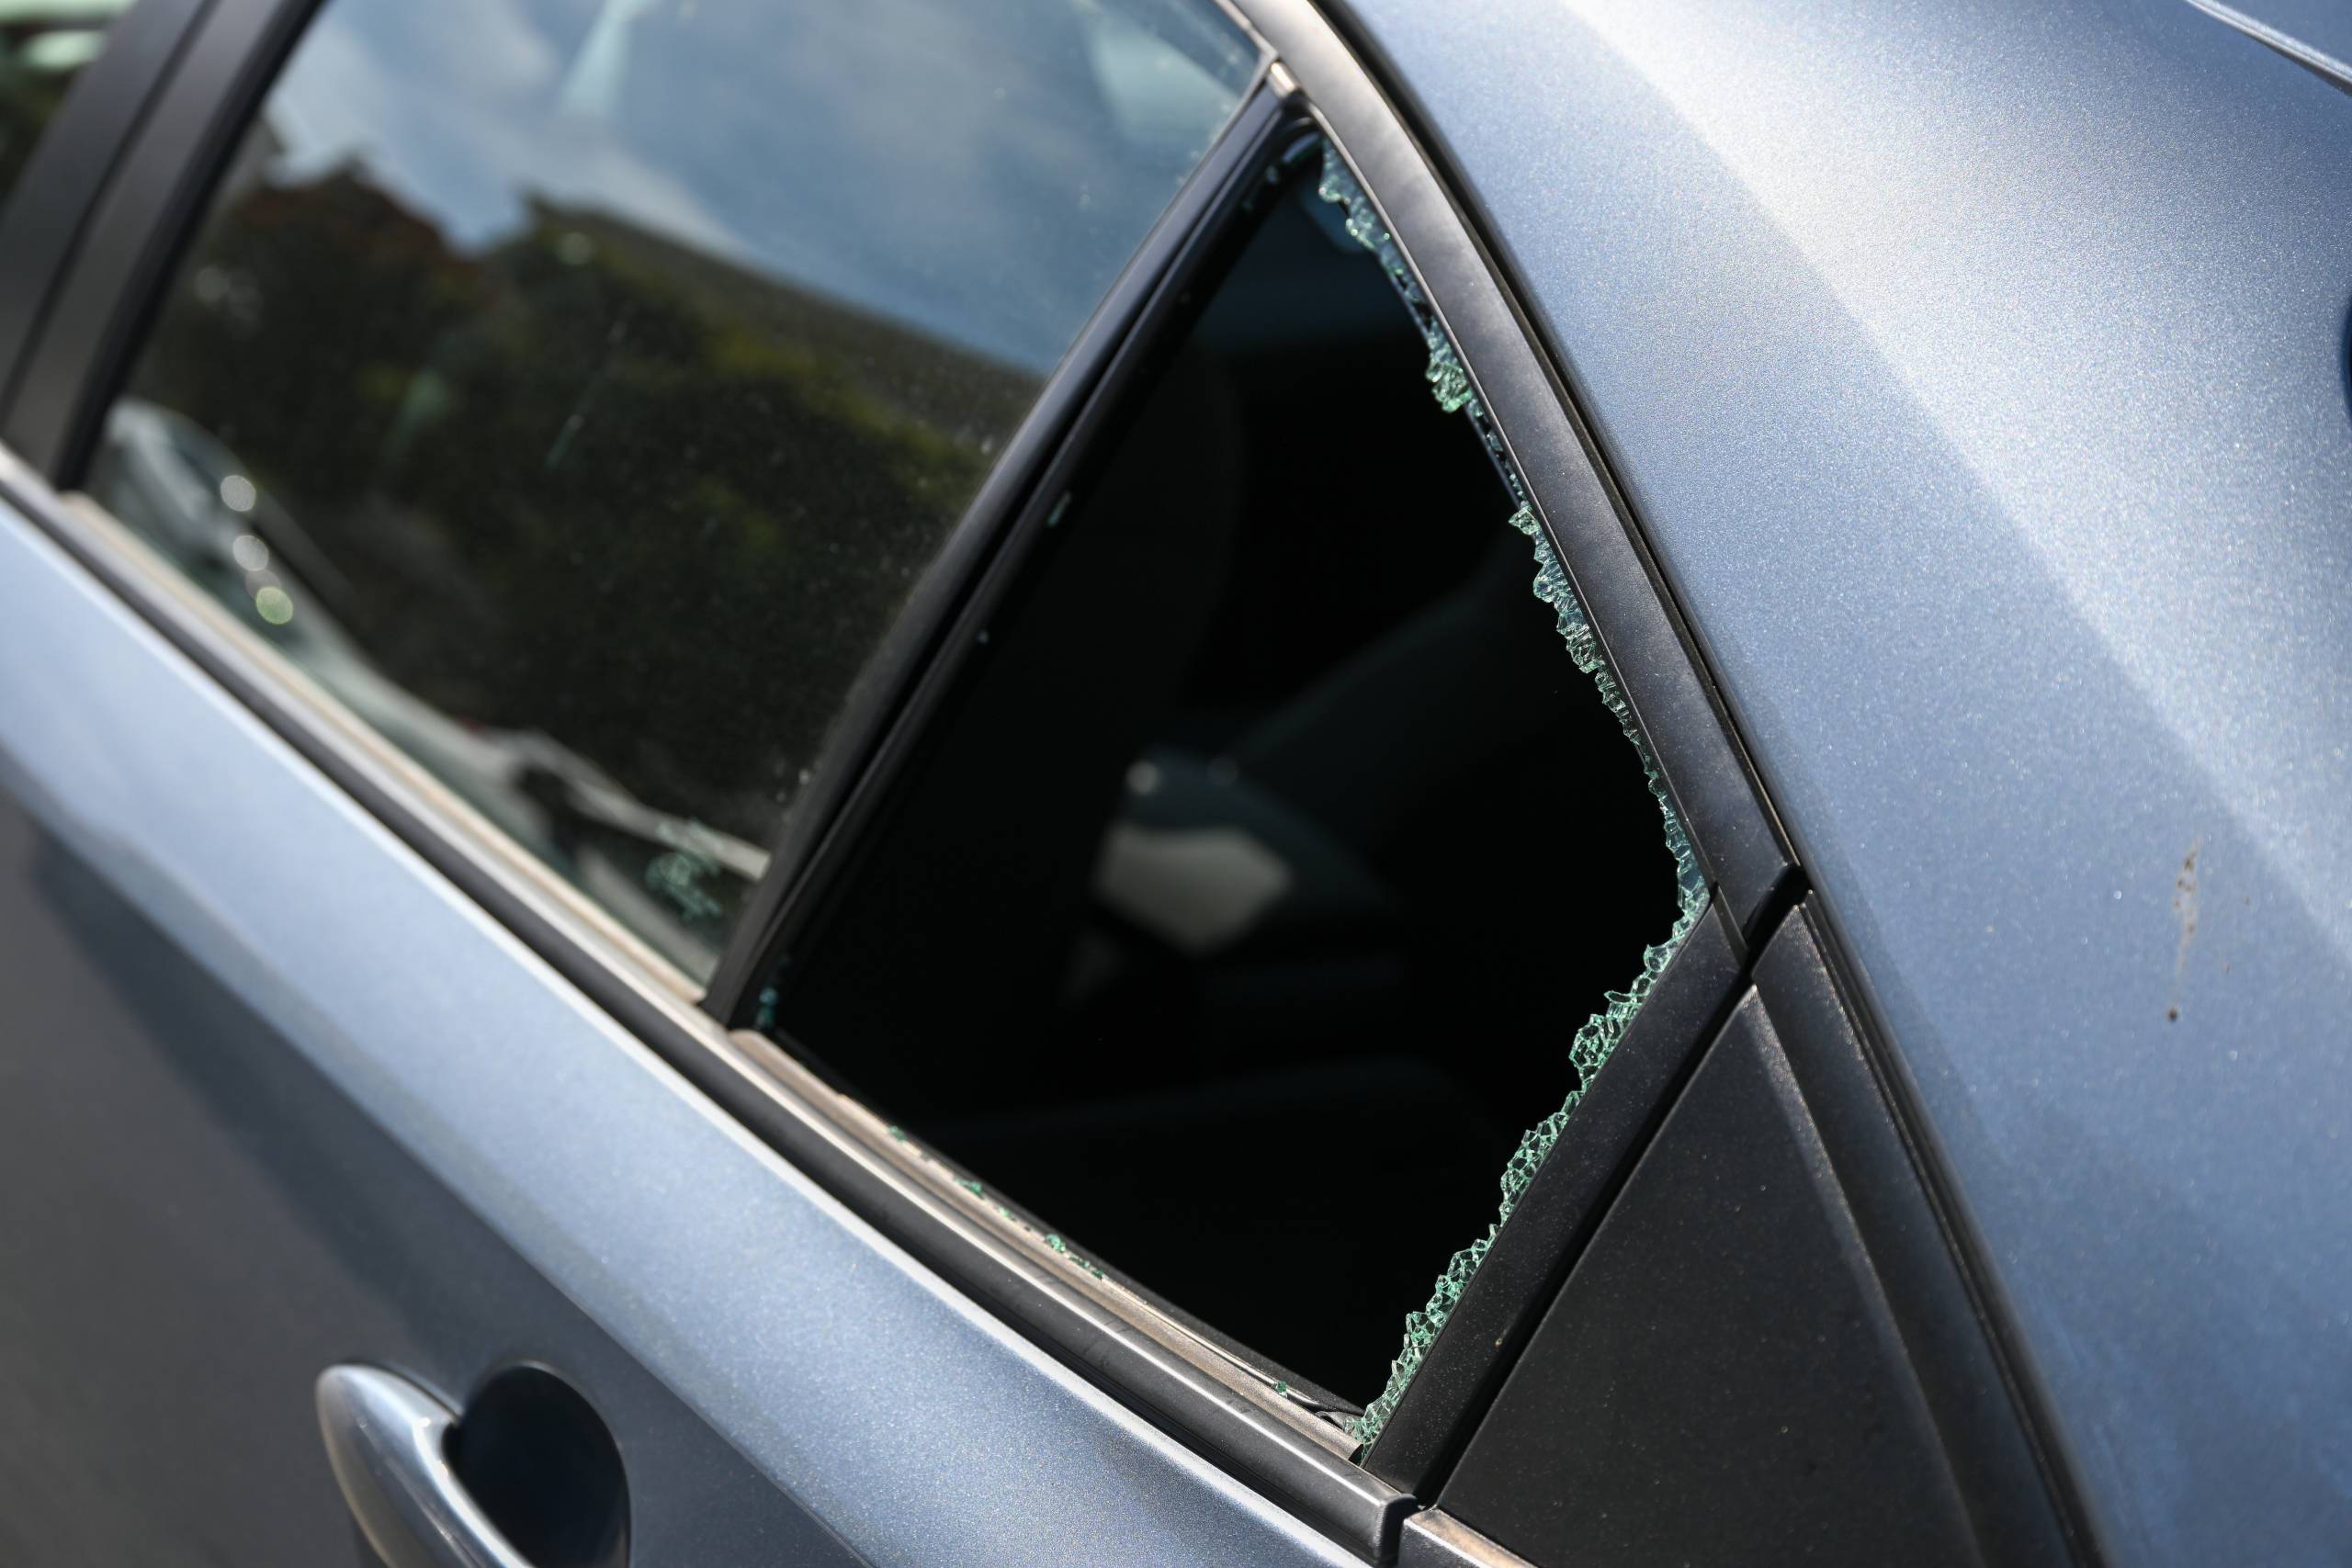 The rear window of a car that is completely shattered.